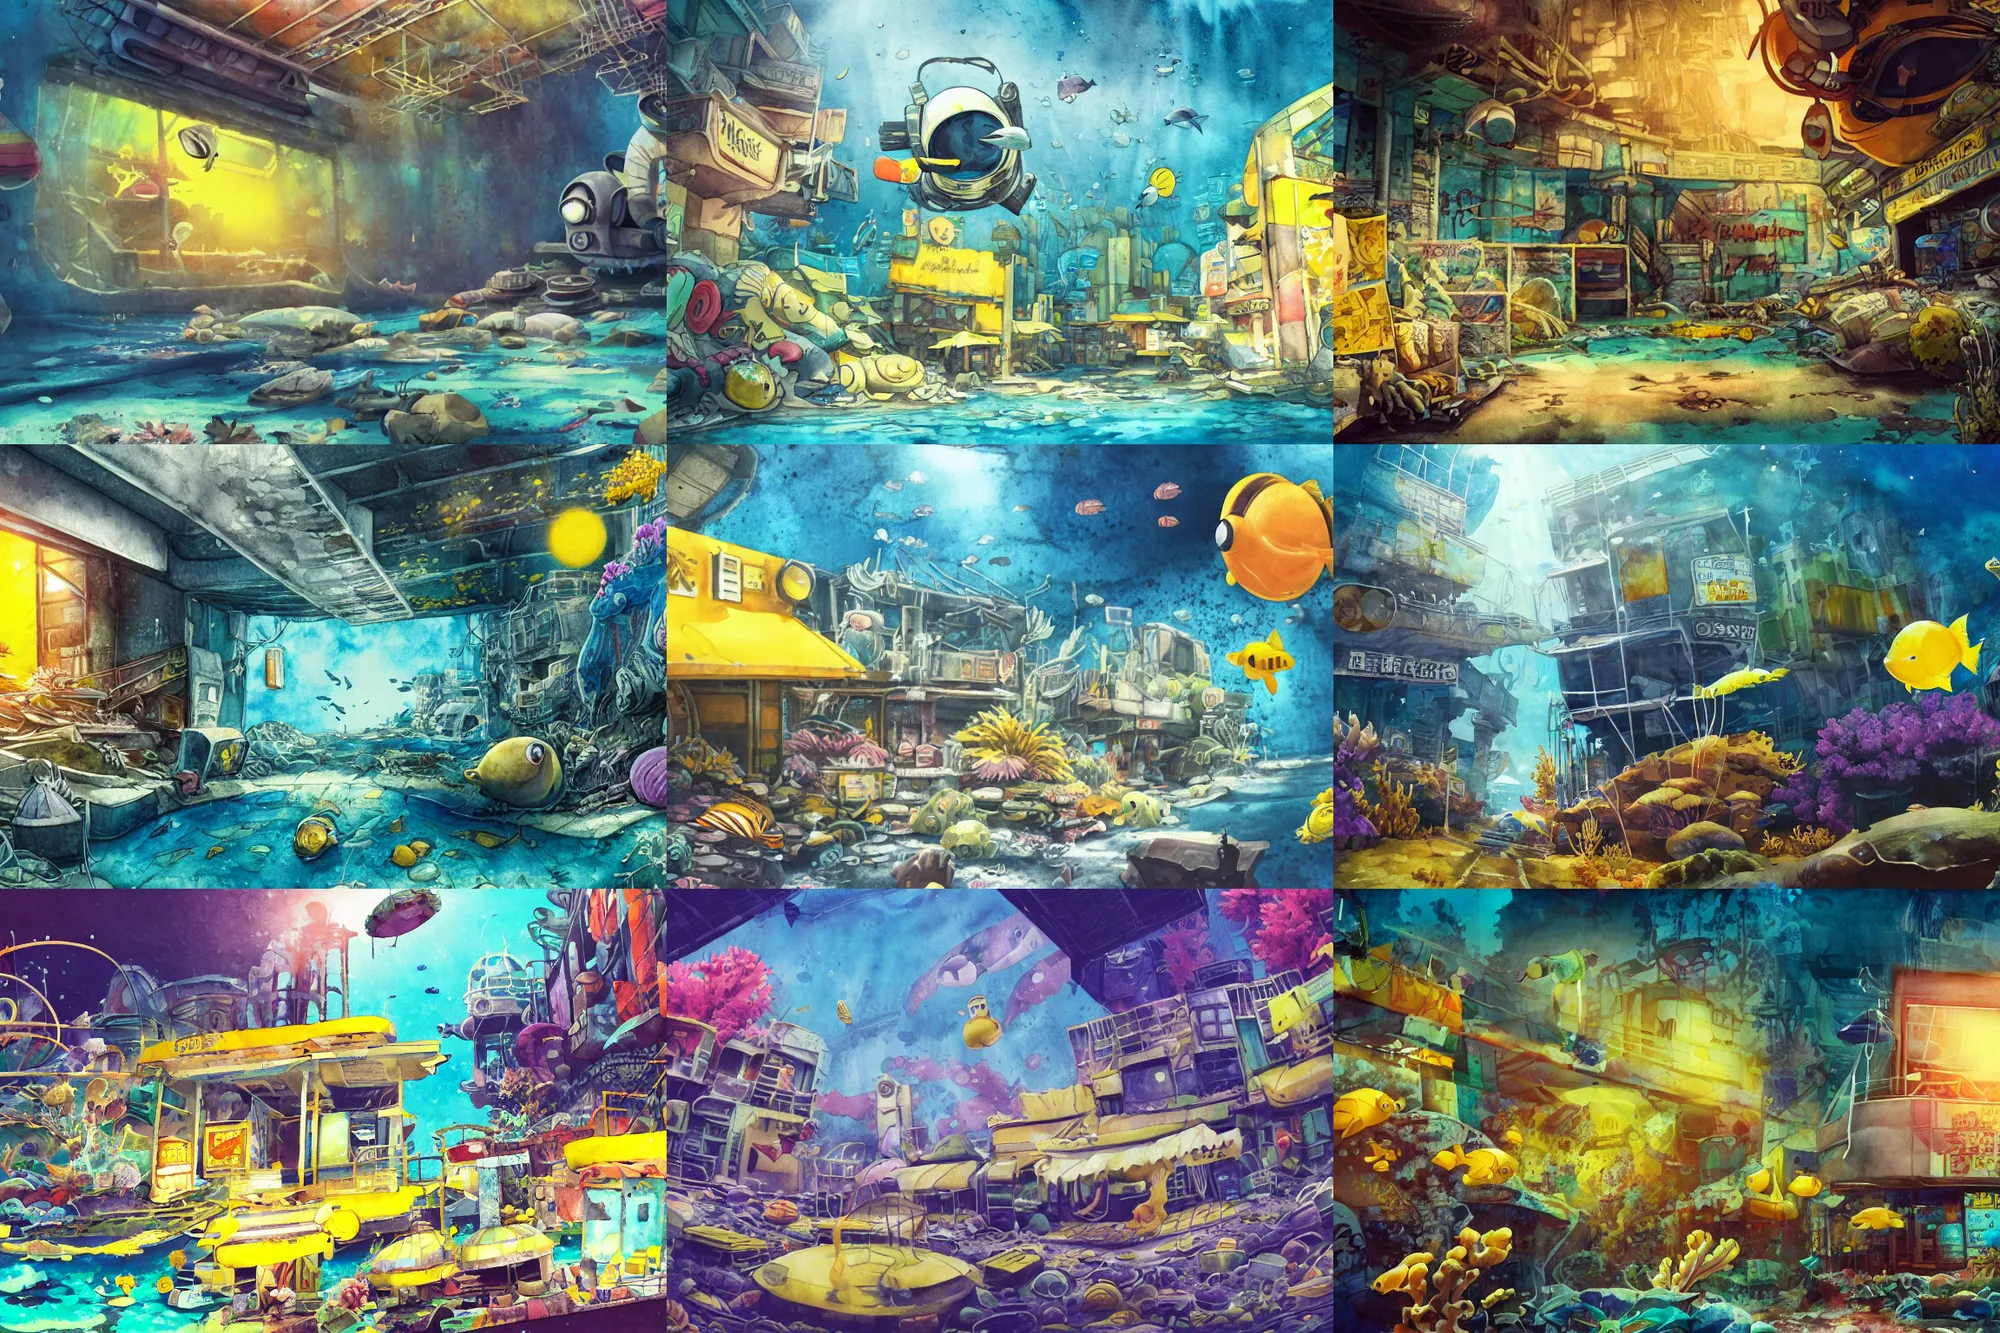 KREA - painted anime background of a flooded underwater slums shopping  district located by a waterfall and built from various sea shells and  corals and being reclaimed by nature, seaweed, light diffraction,